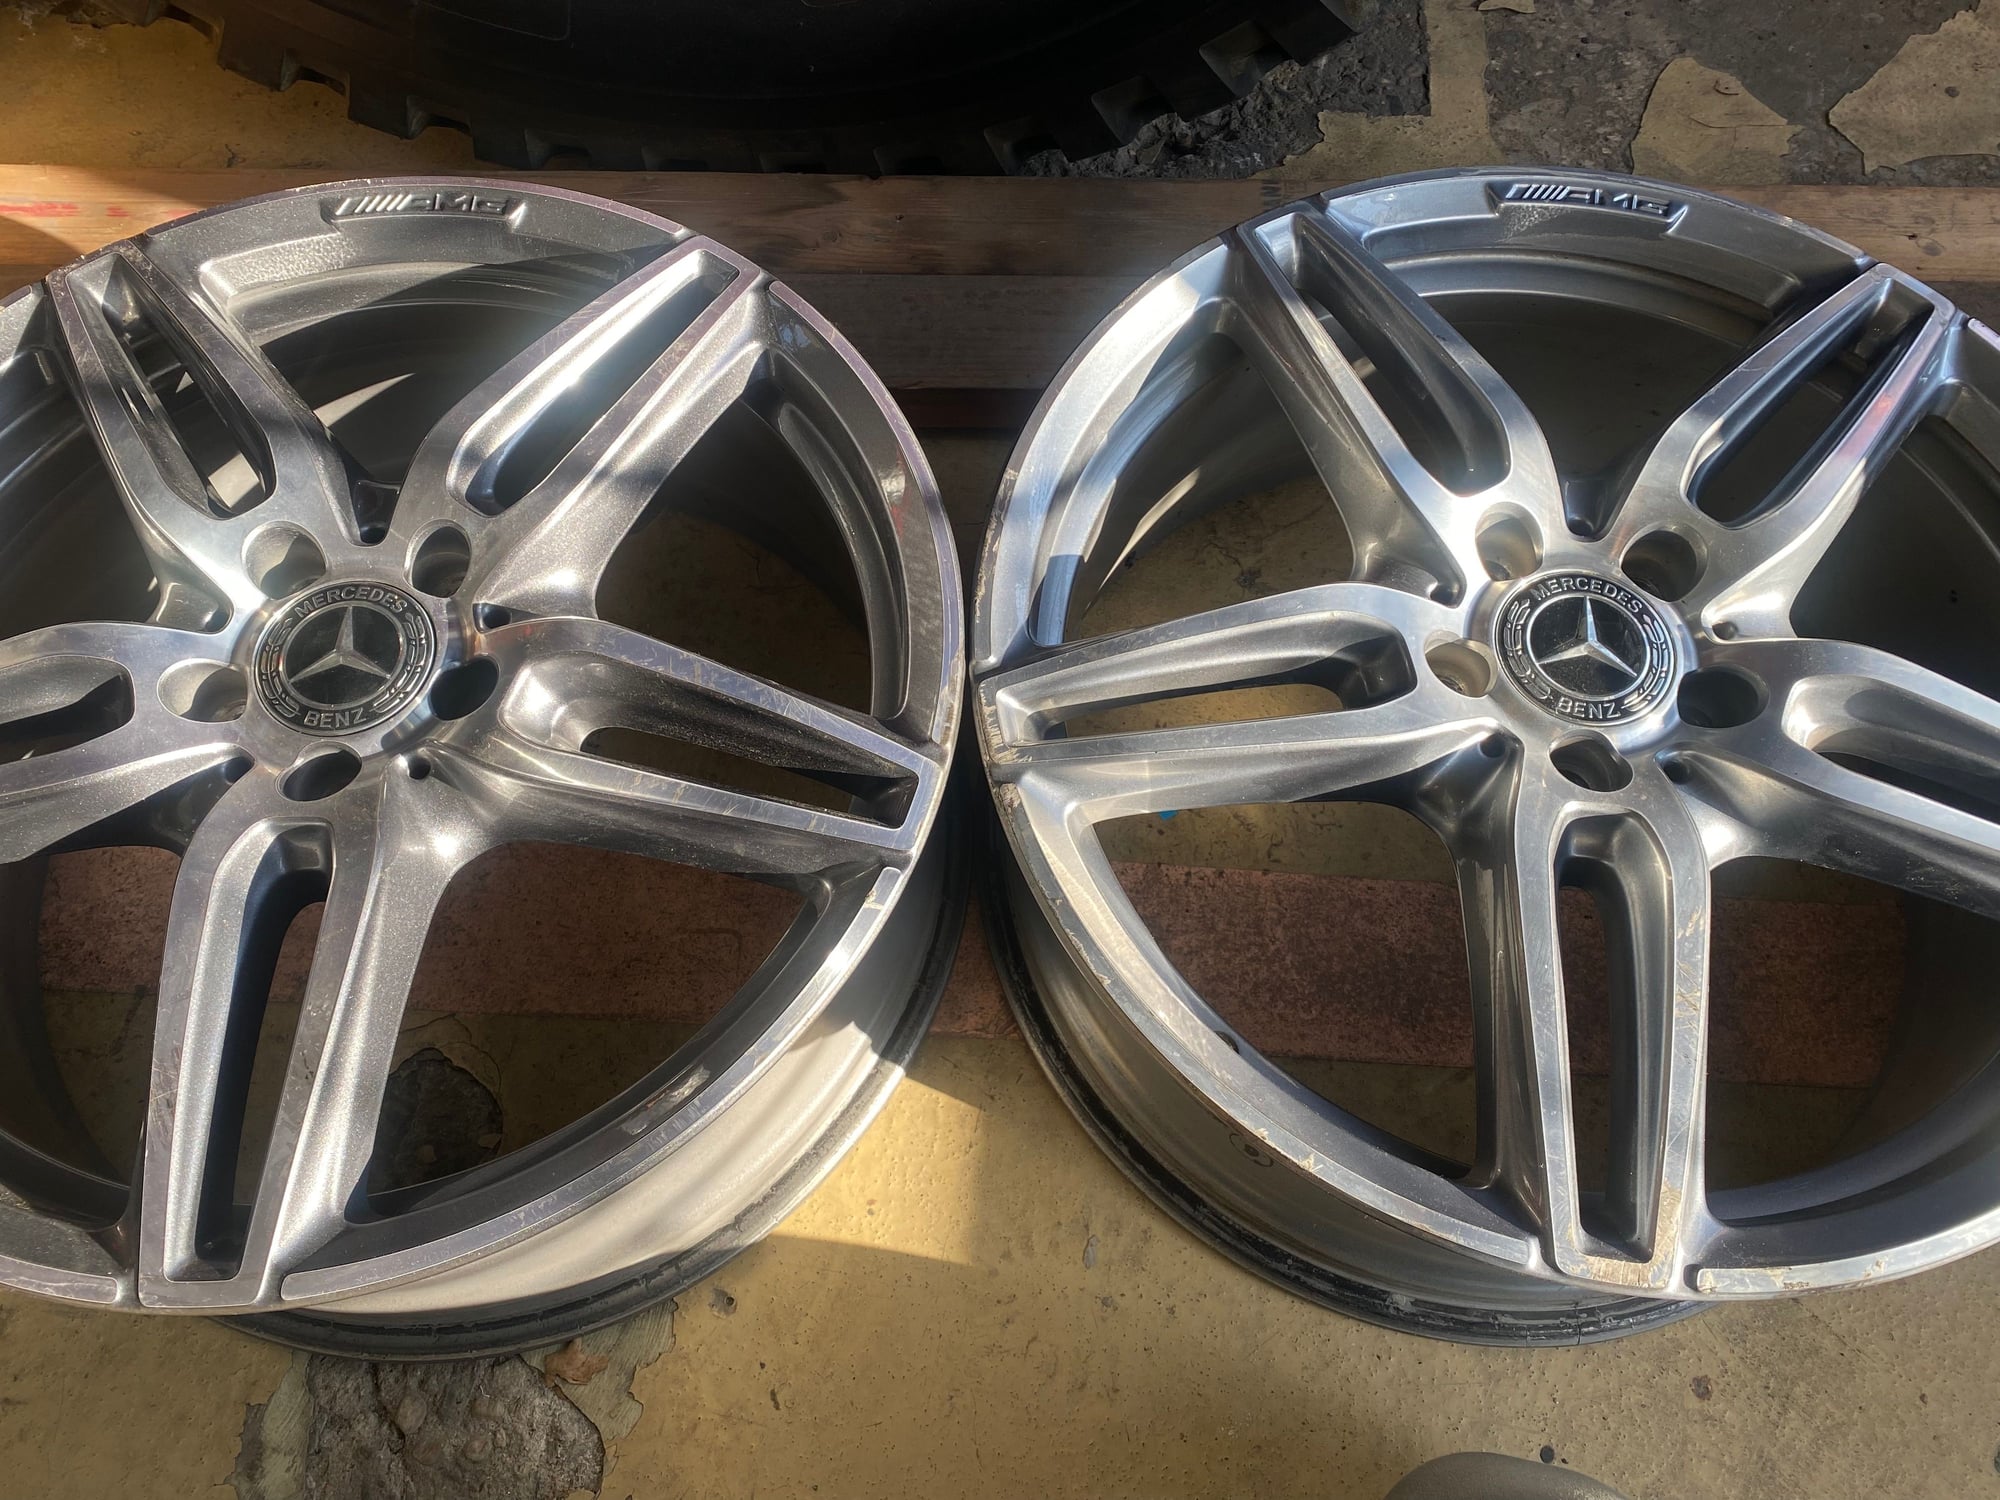 Wheels and Tires/Axles - (4) AMG 19x8 Wheels a2134012000 - Used - 0  All Models - Brooklyn, NY 11236, United States